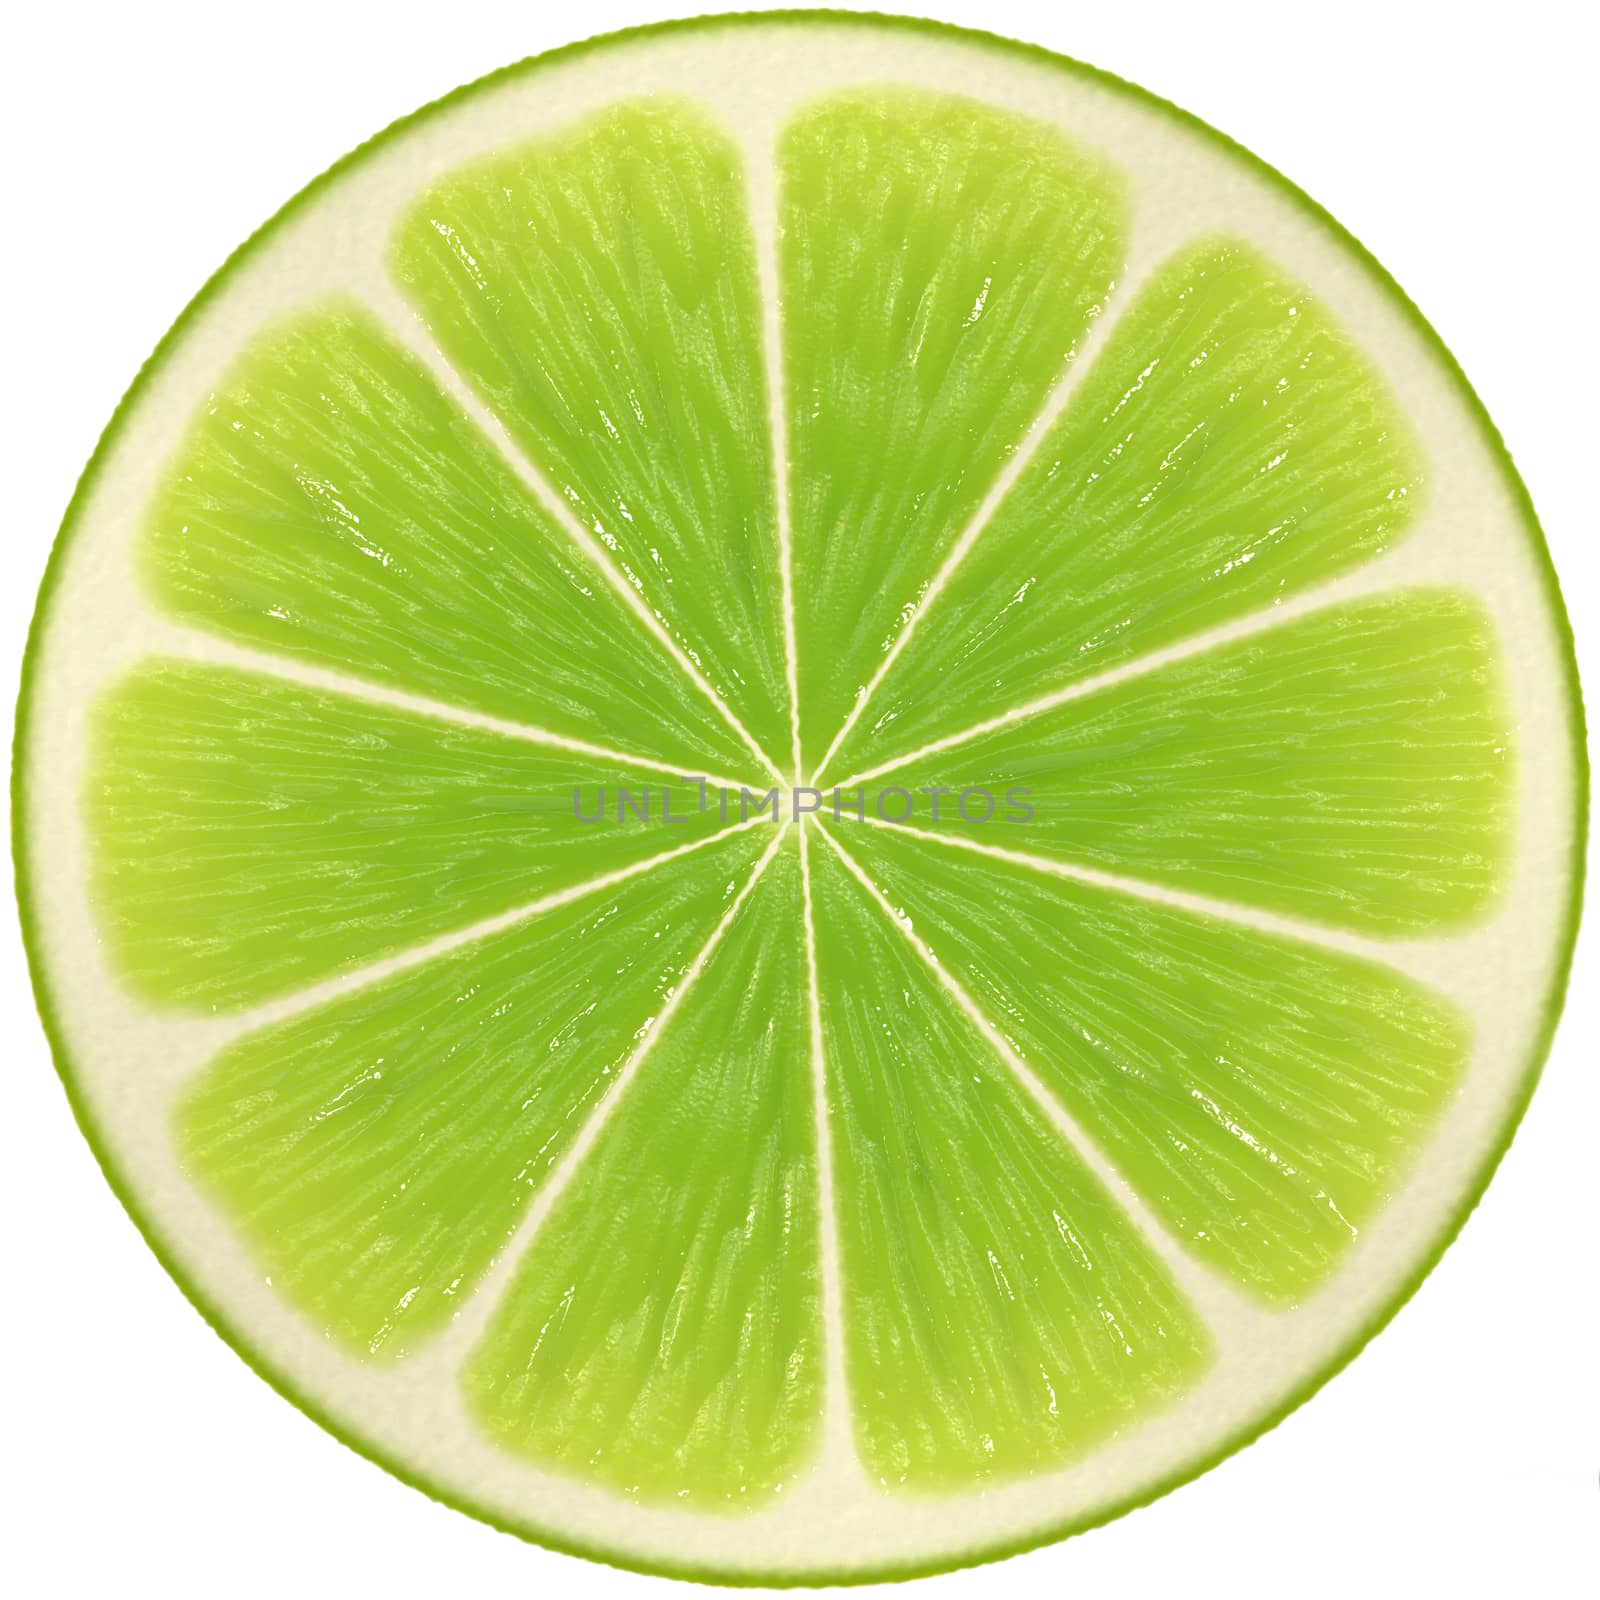 Slice of lime isolated on white background